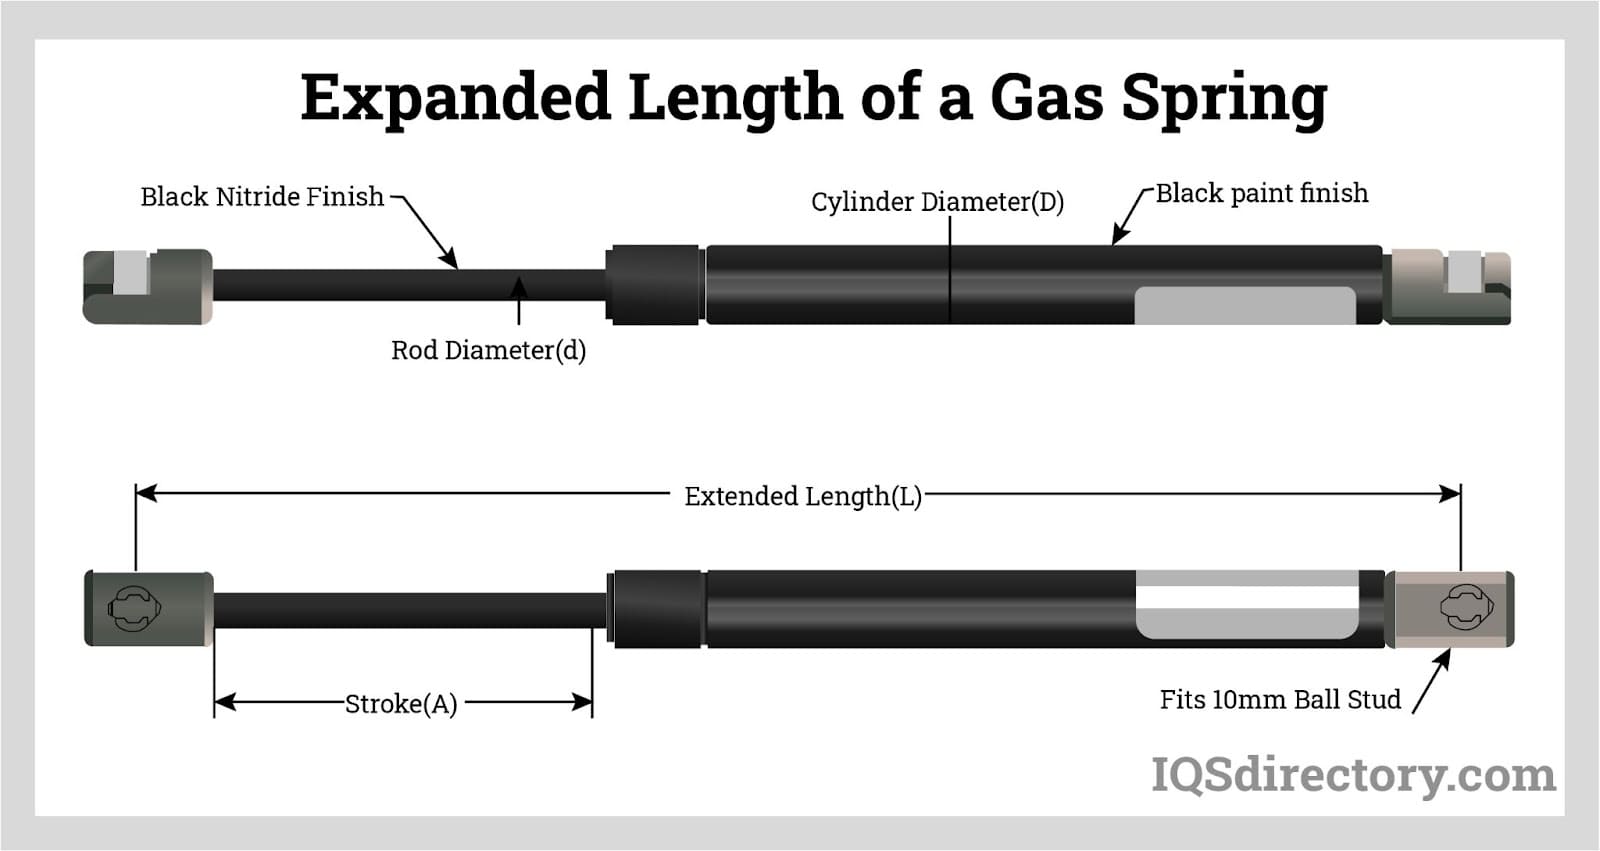 Expanded Length of a Gas Spring